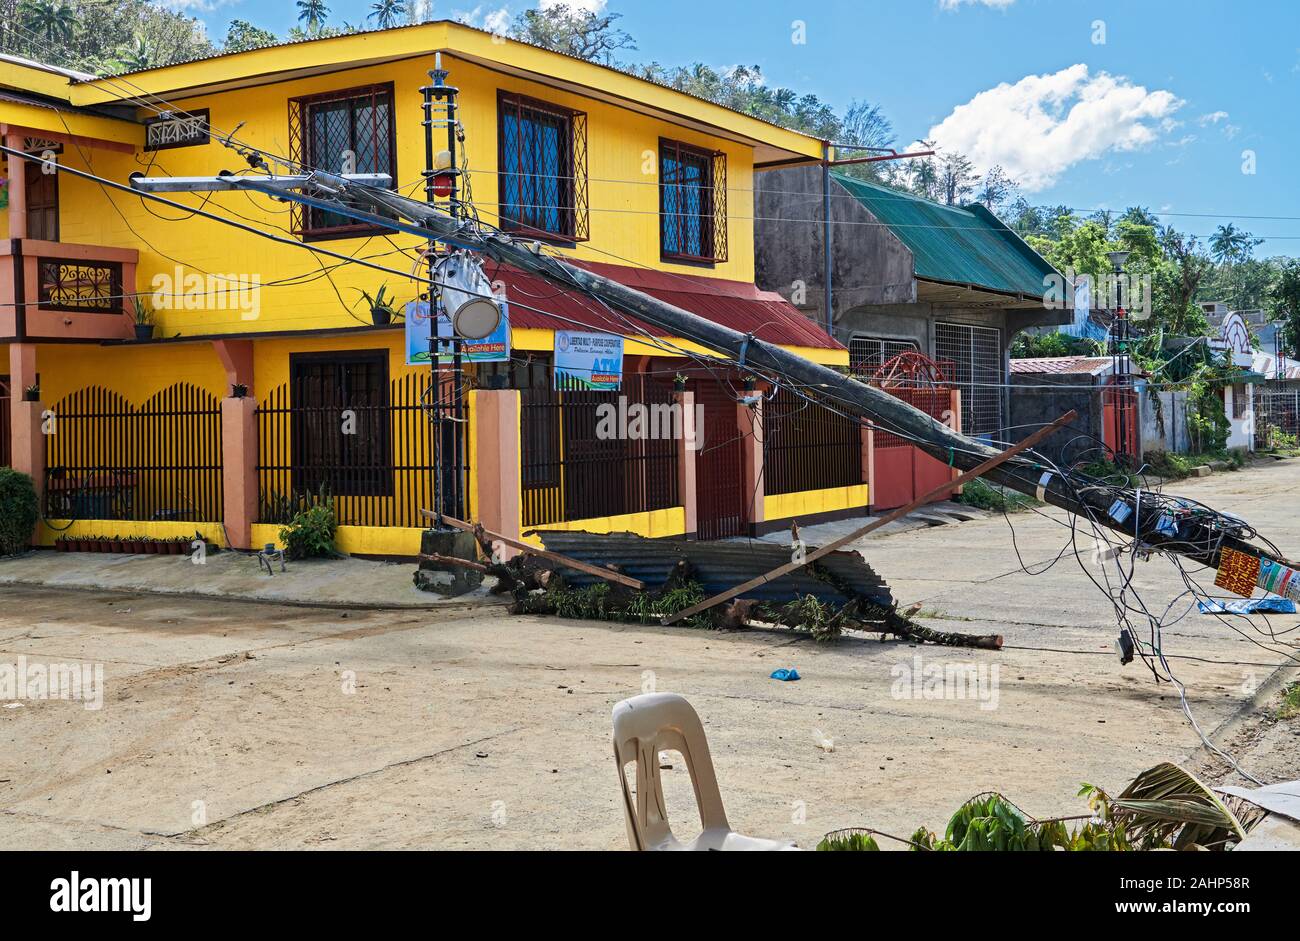 Buruanga Town, Aklan Province, Philippines - December 29, 2019: Typhoon Ursula leaving many provinces without electricity for weeks to come Stock Photo